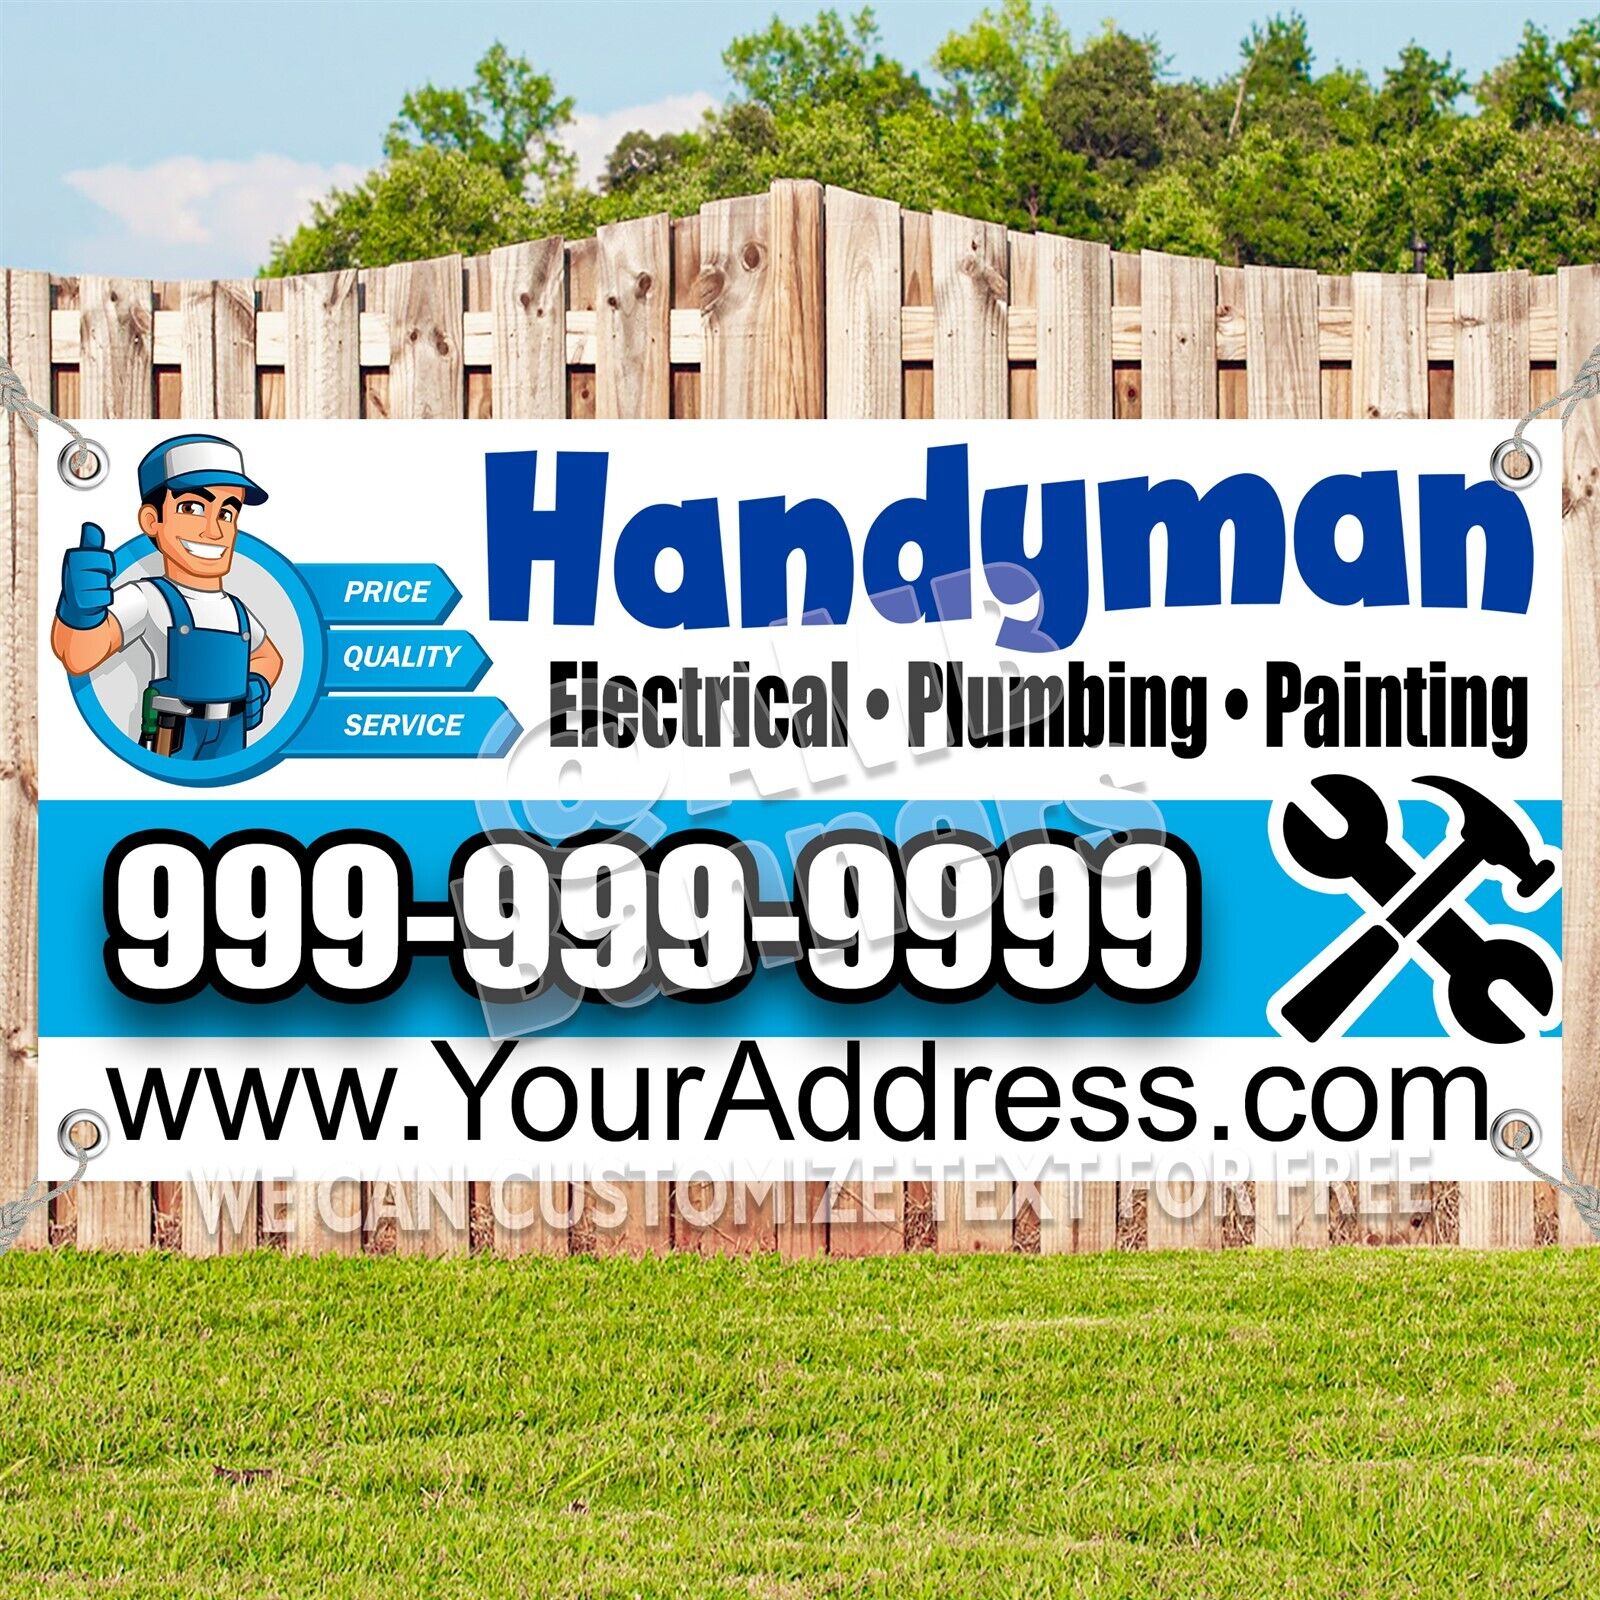 HANDY MAN ELECTRICAL PLUMBING PAINTING PHOHE Advertising Vinyl Banner Sign Sizes